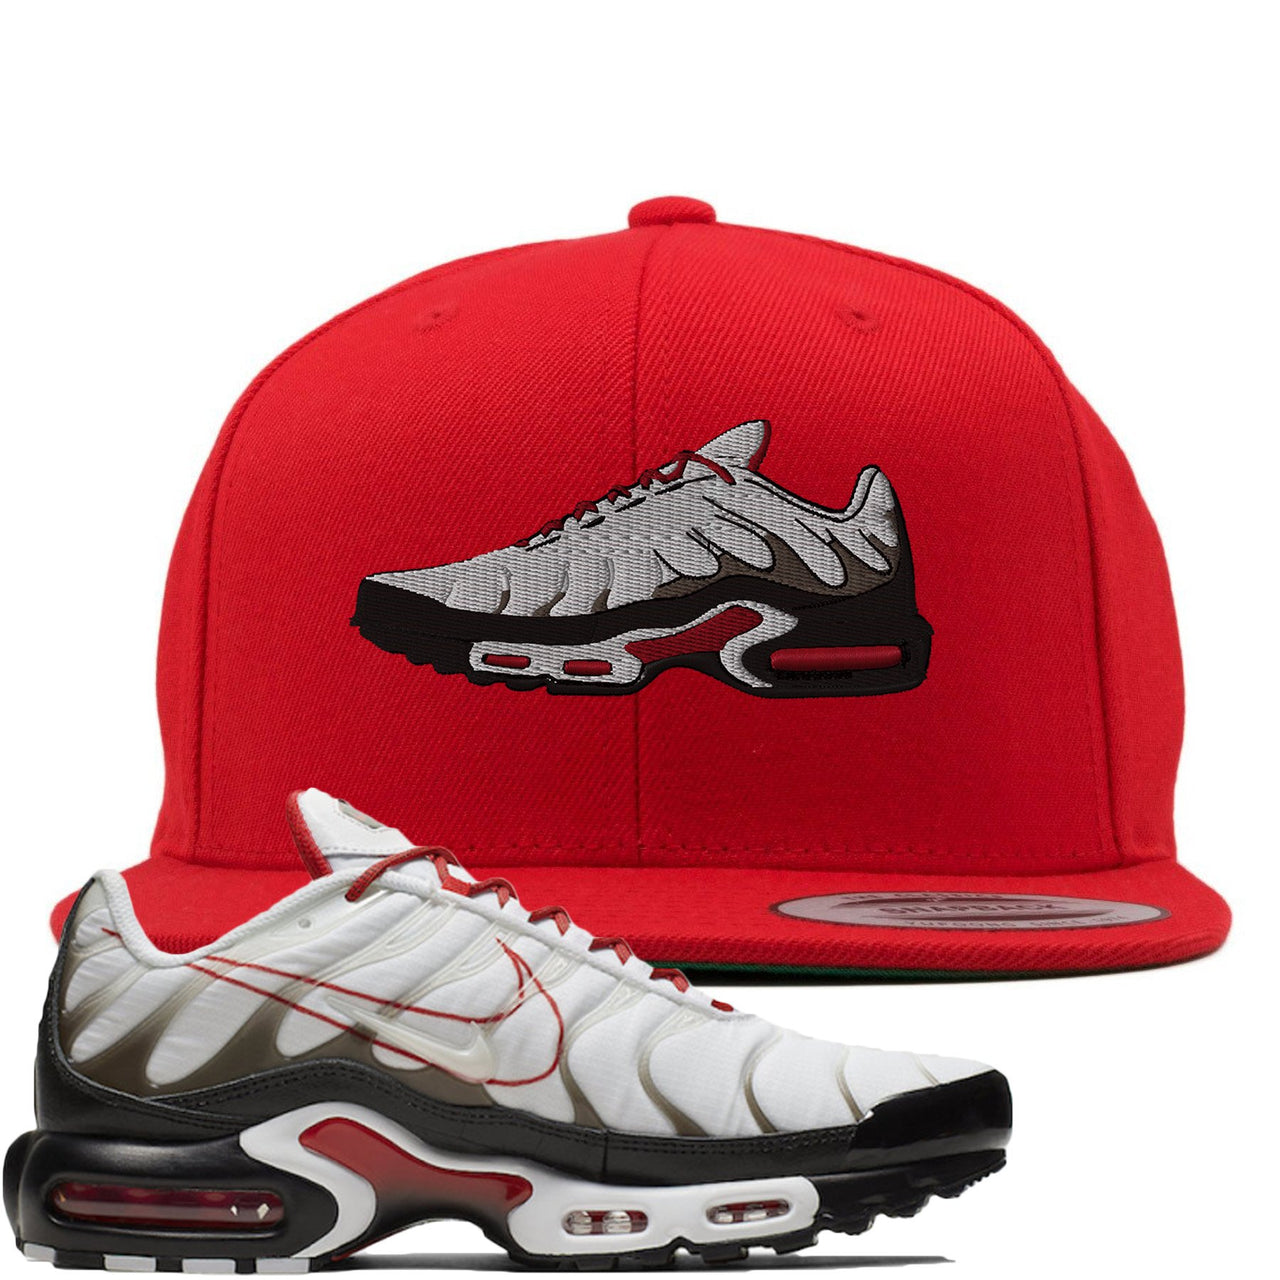 White University Red Pluses Snapback | Shoe, Red